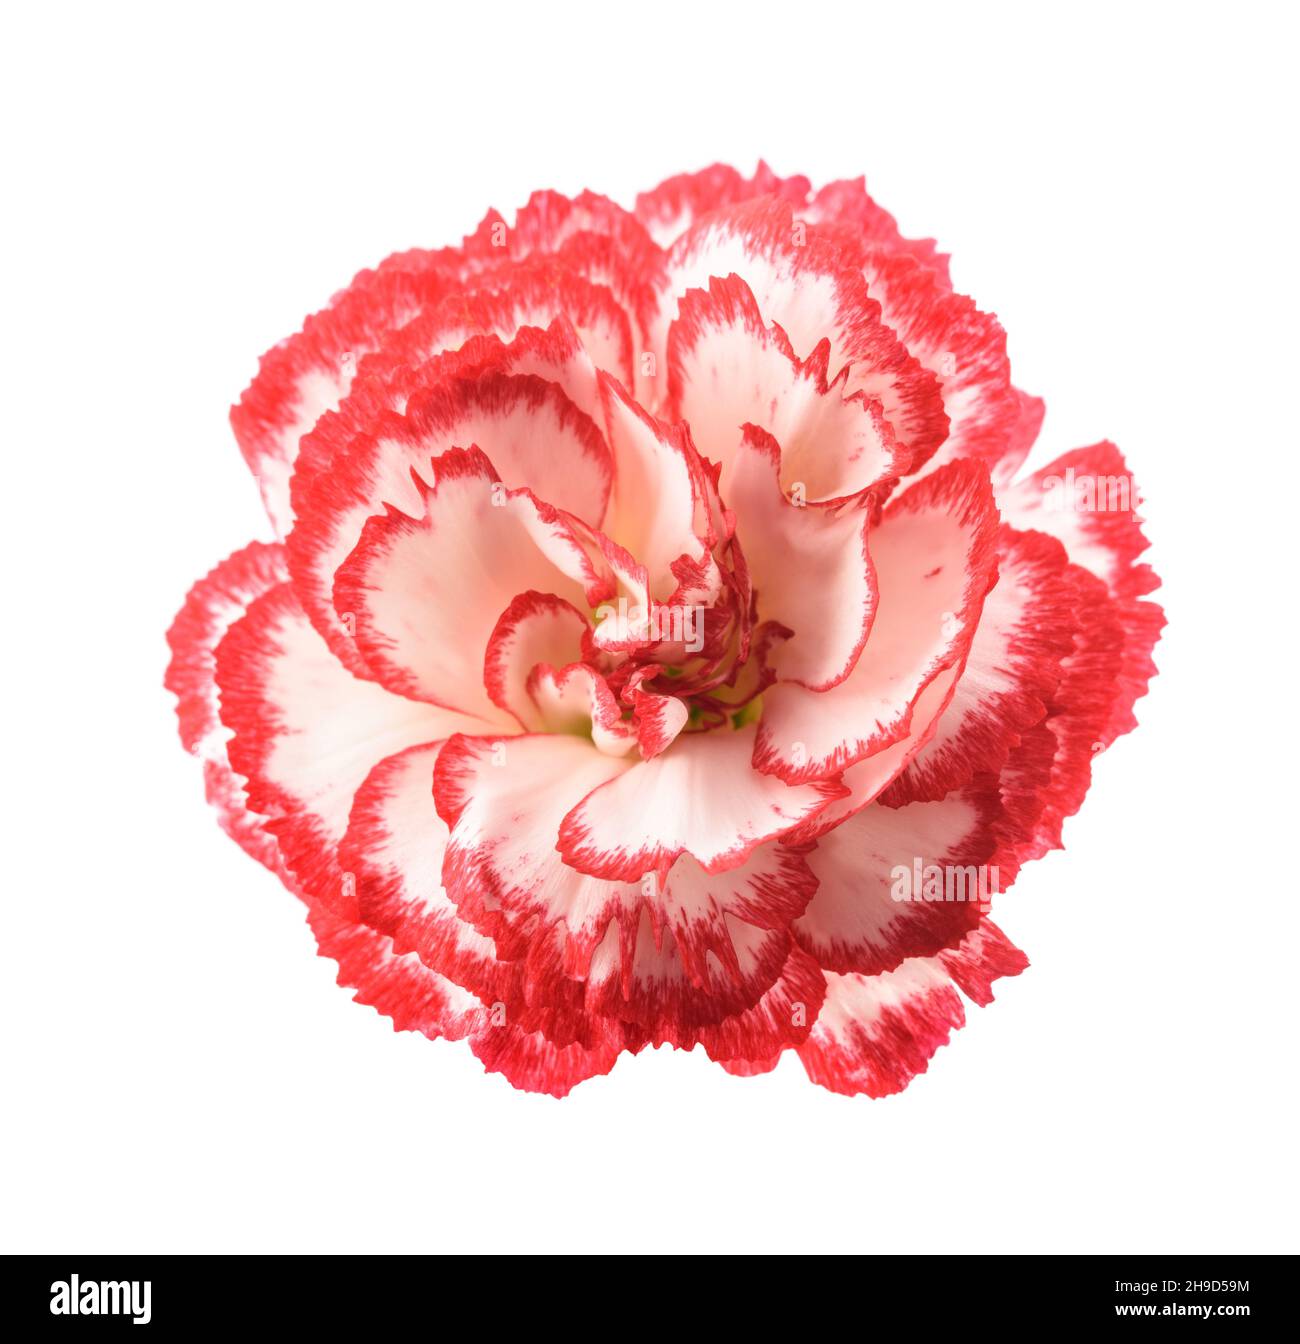 Red and white carnation isolated on white background Stock Photo